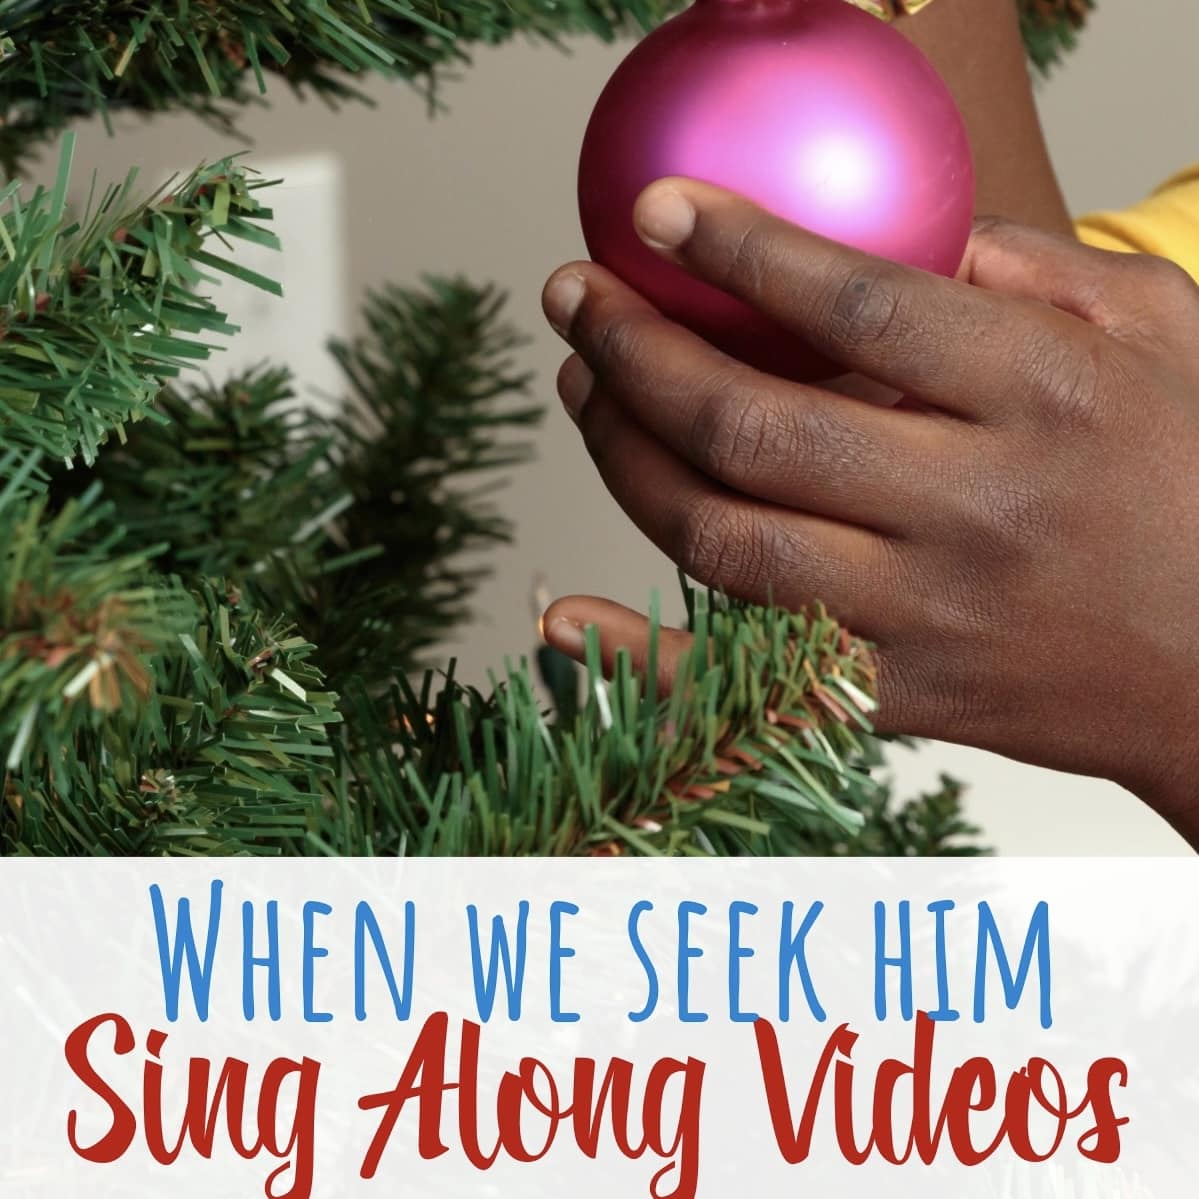 3 When We Seek Him Sing Along Videos primary review activity for LDS Primary Song Leaders teaching this Christmas song! 